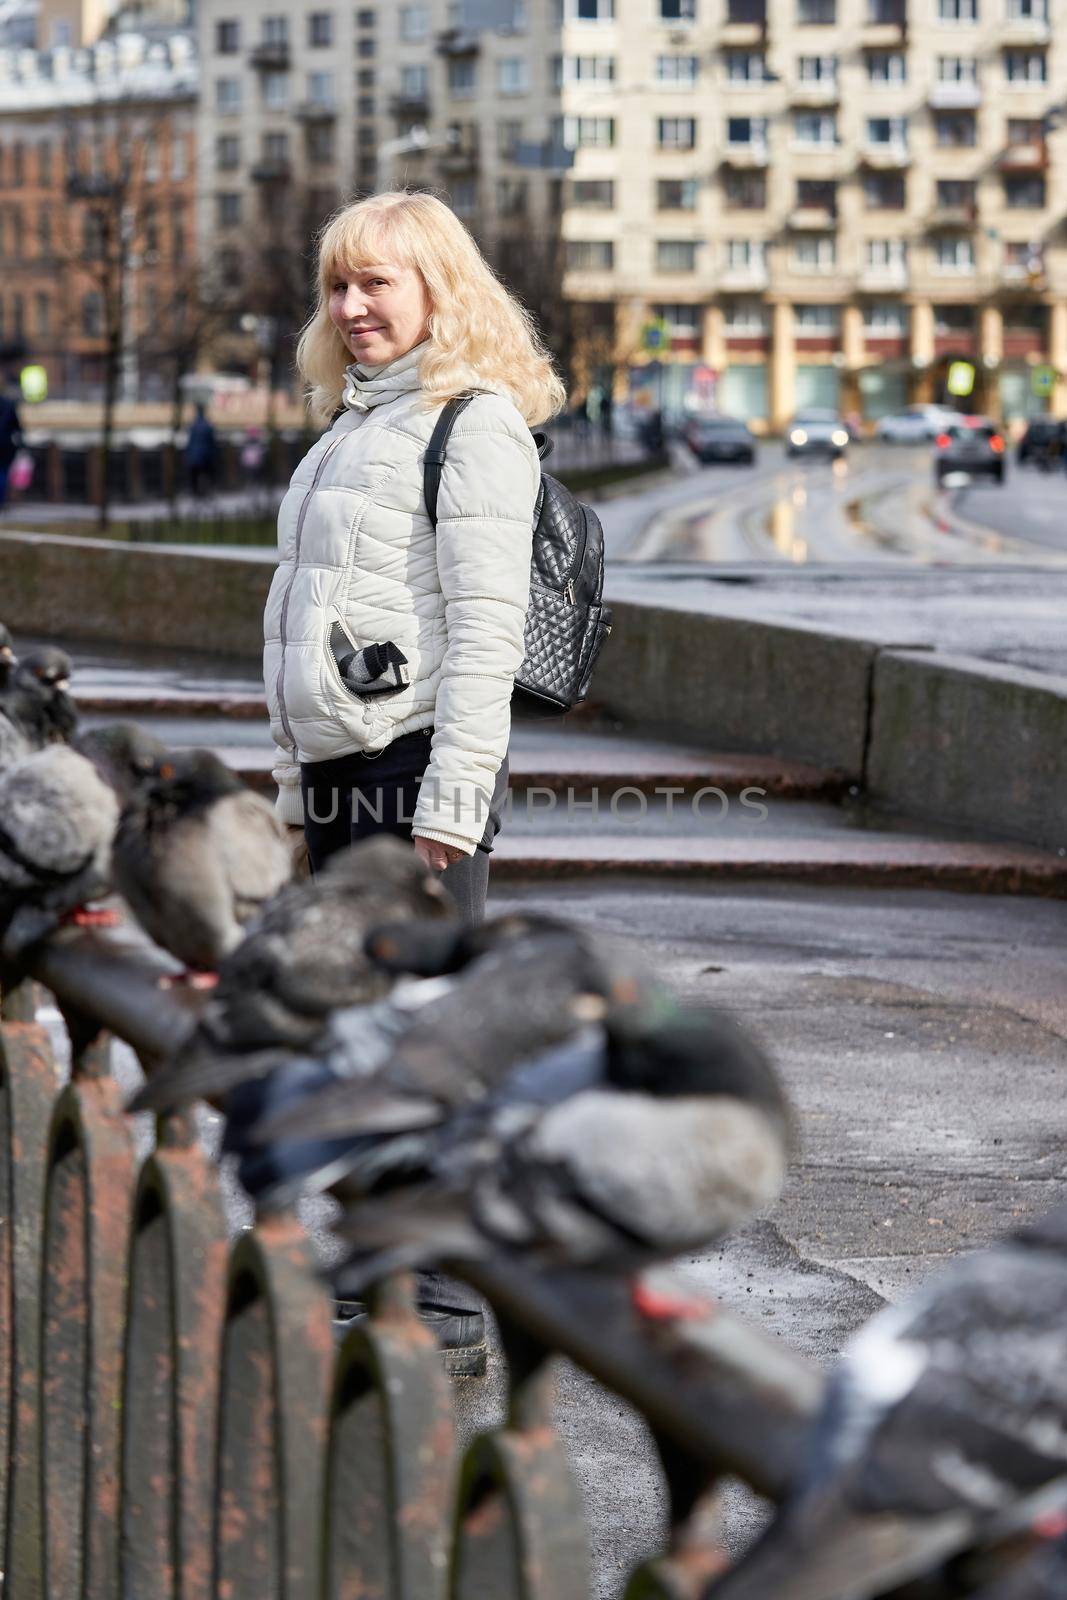 Blonde girl in a light jacket next to a metal fence and pigeons sitting on it, cityscape